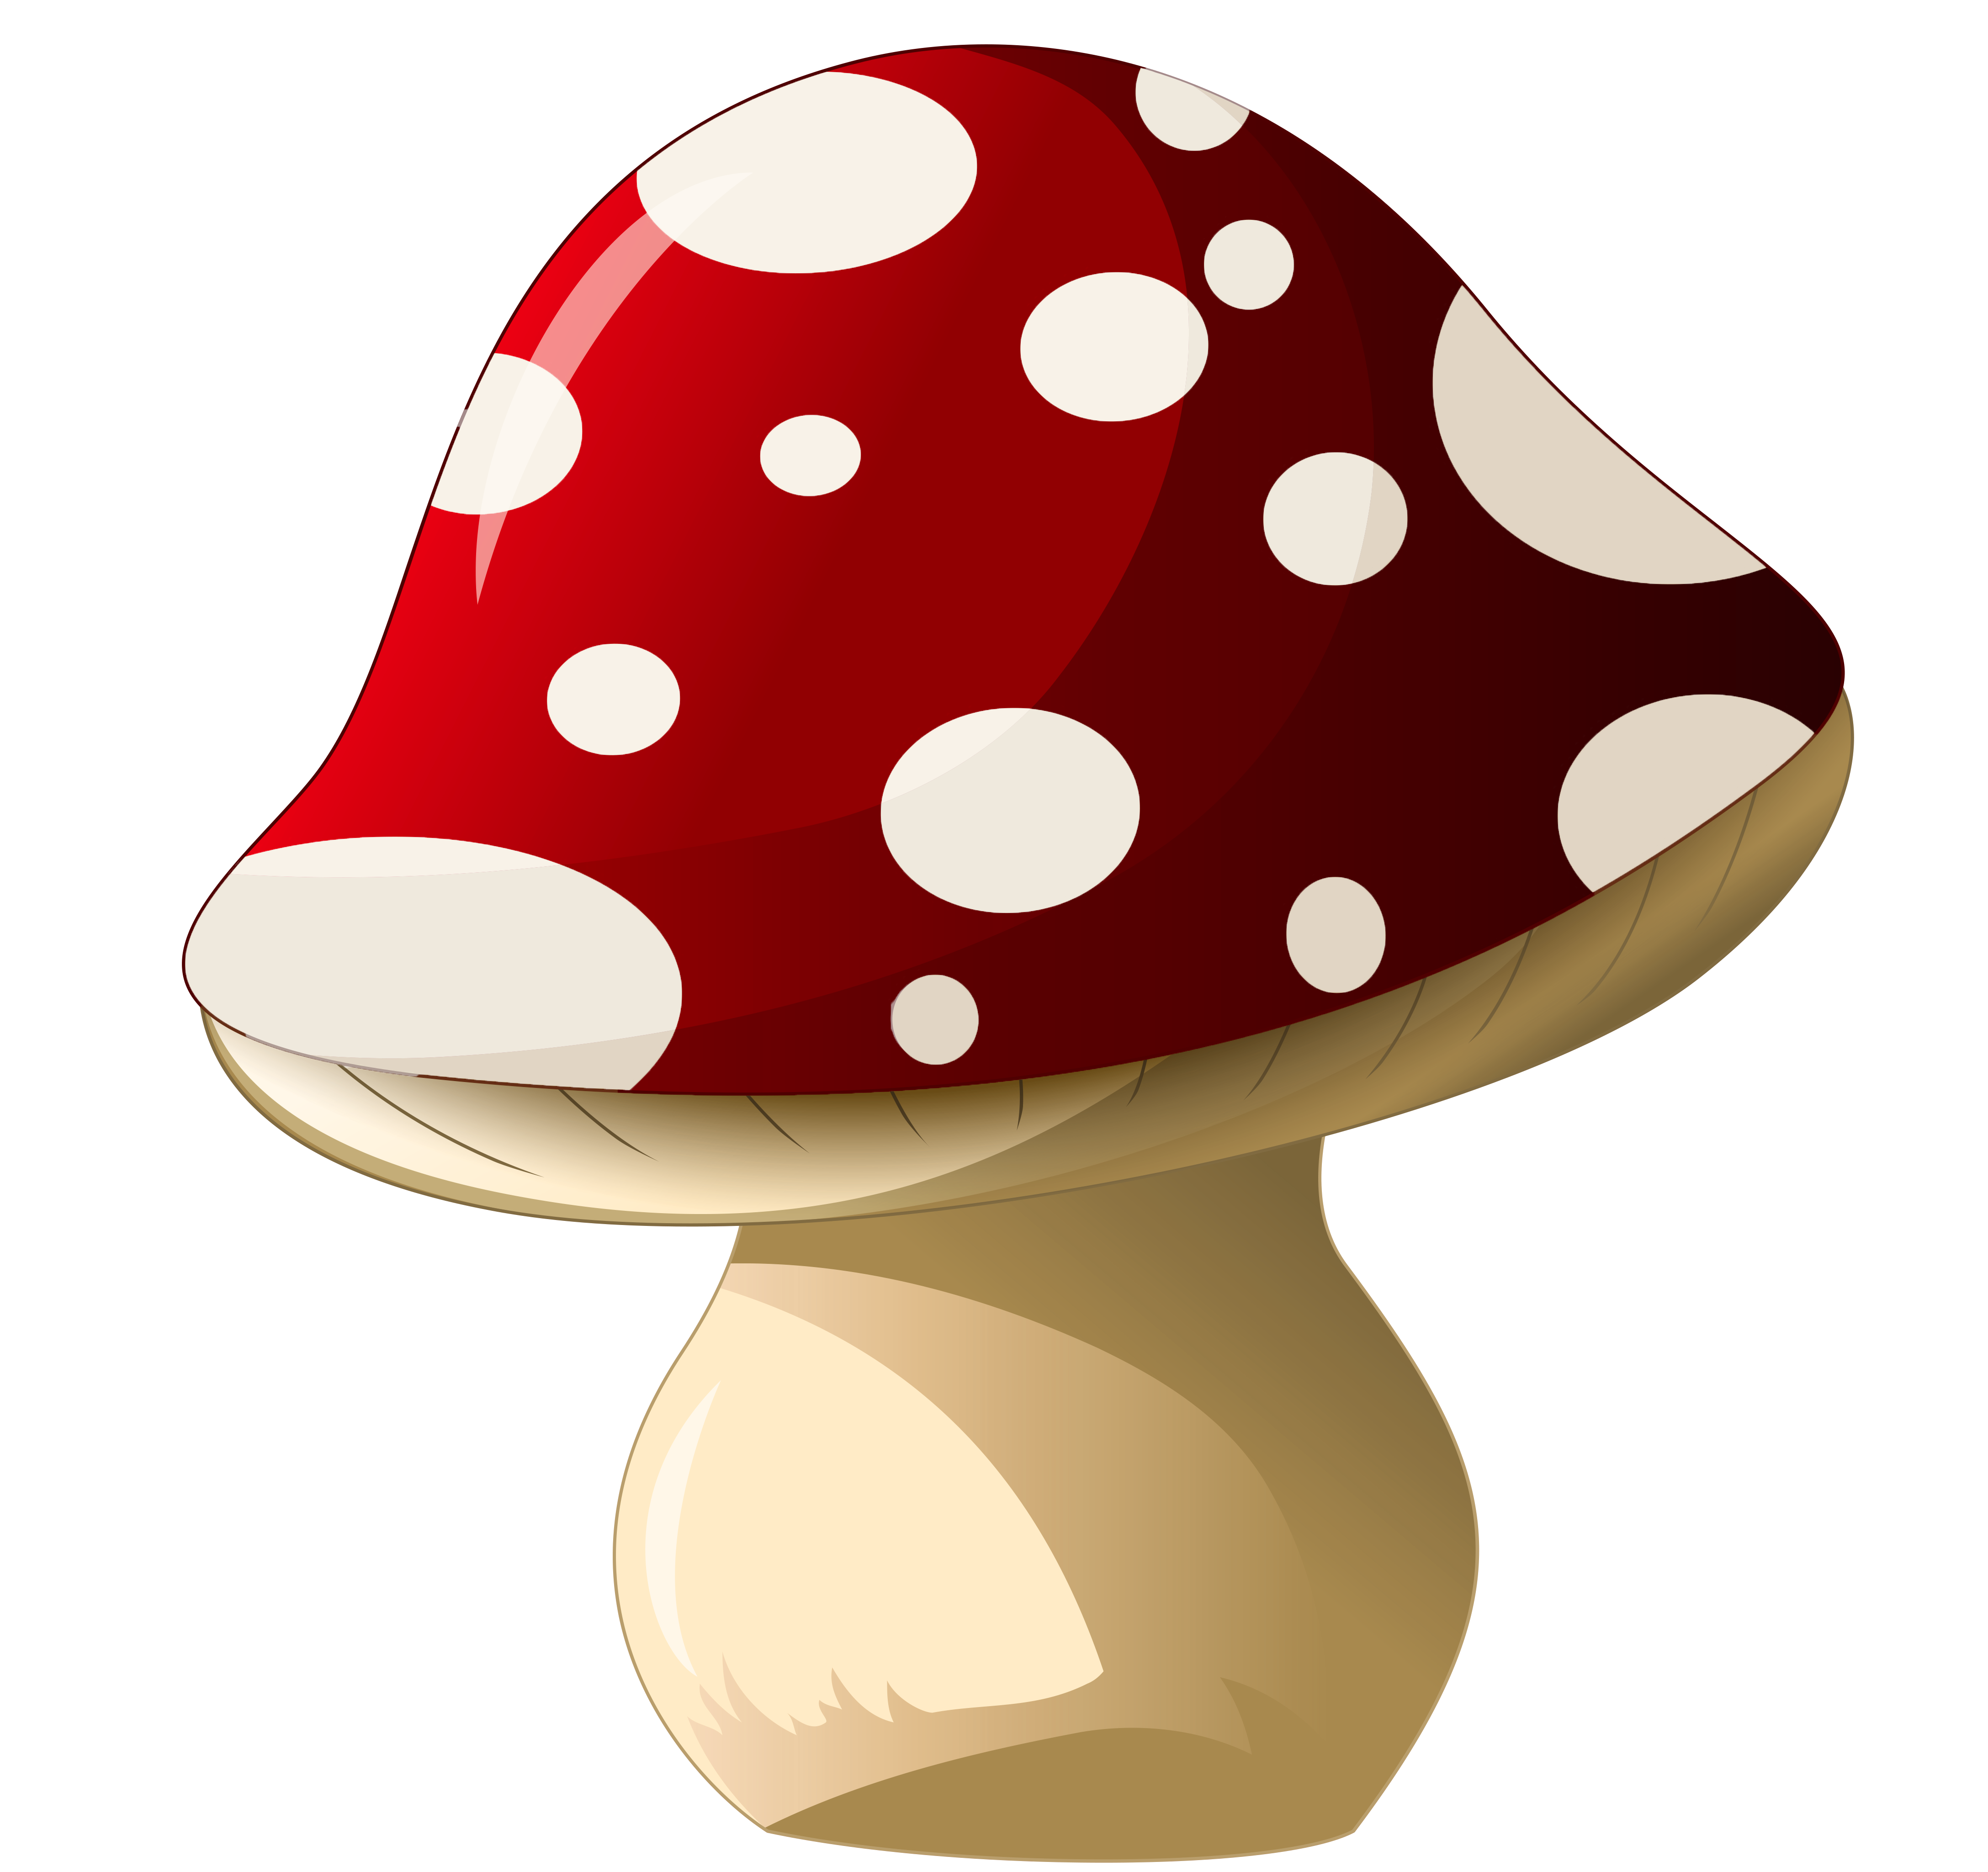 Shroom clipart 20 free Cliparts | Download images on ...